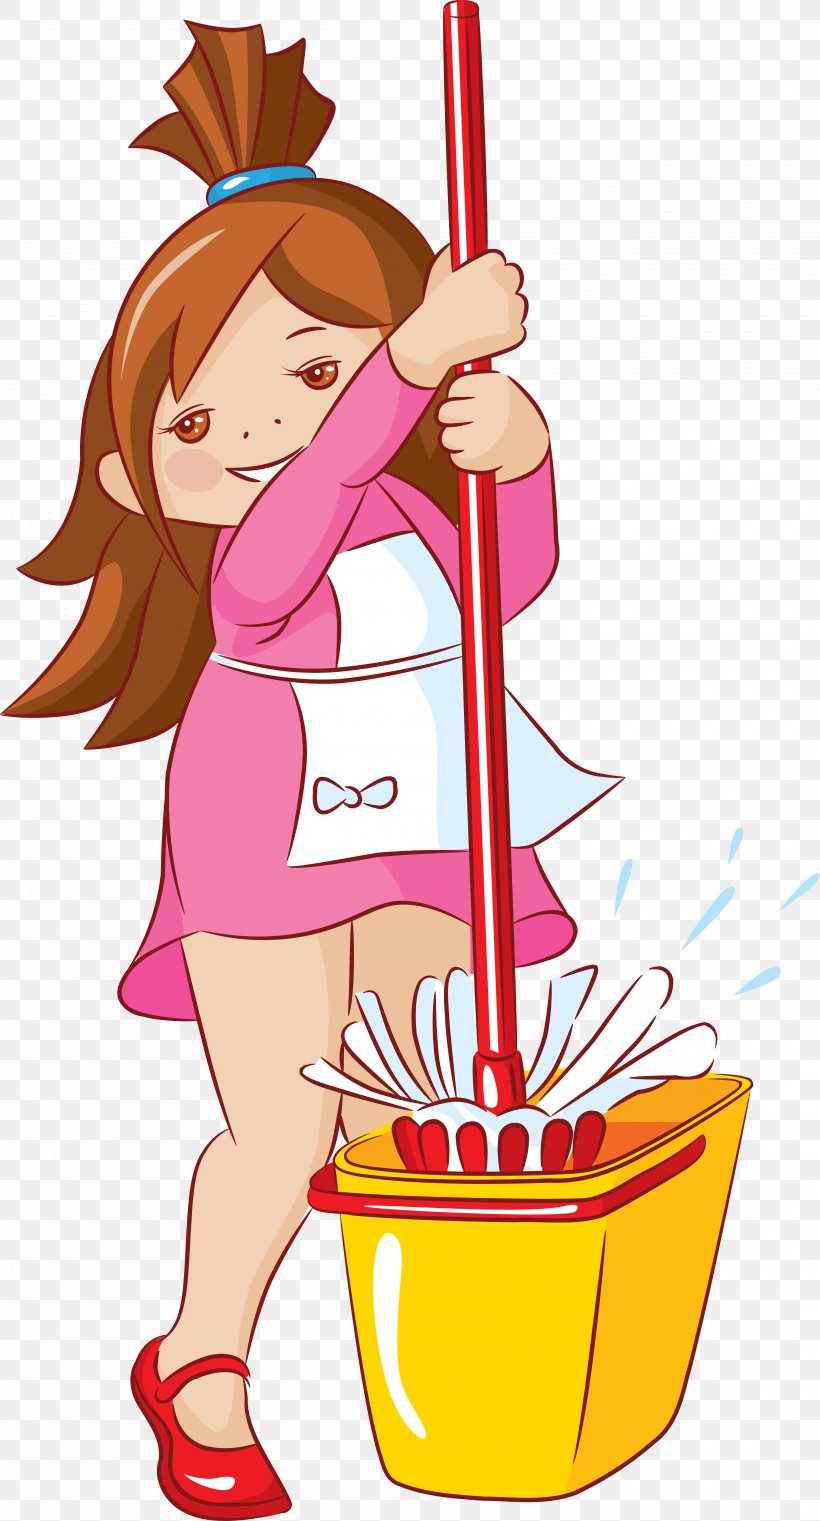 Cleaning Child Housekeeping Clip Art, PNG, 4160x7721px, Cleaning, Art, Artwork, Cartoon, Child Download Free